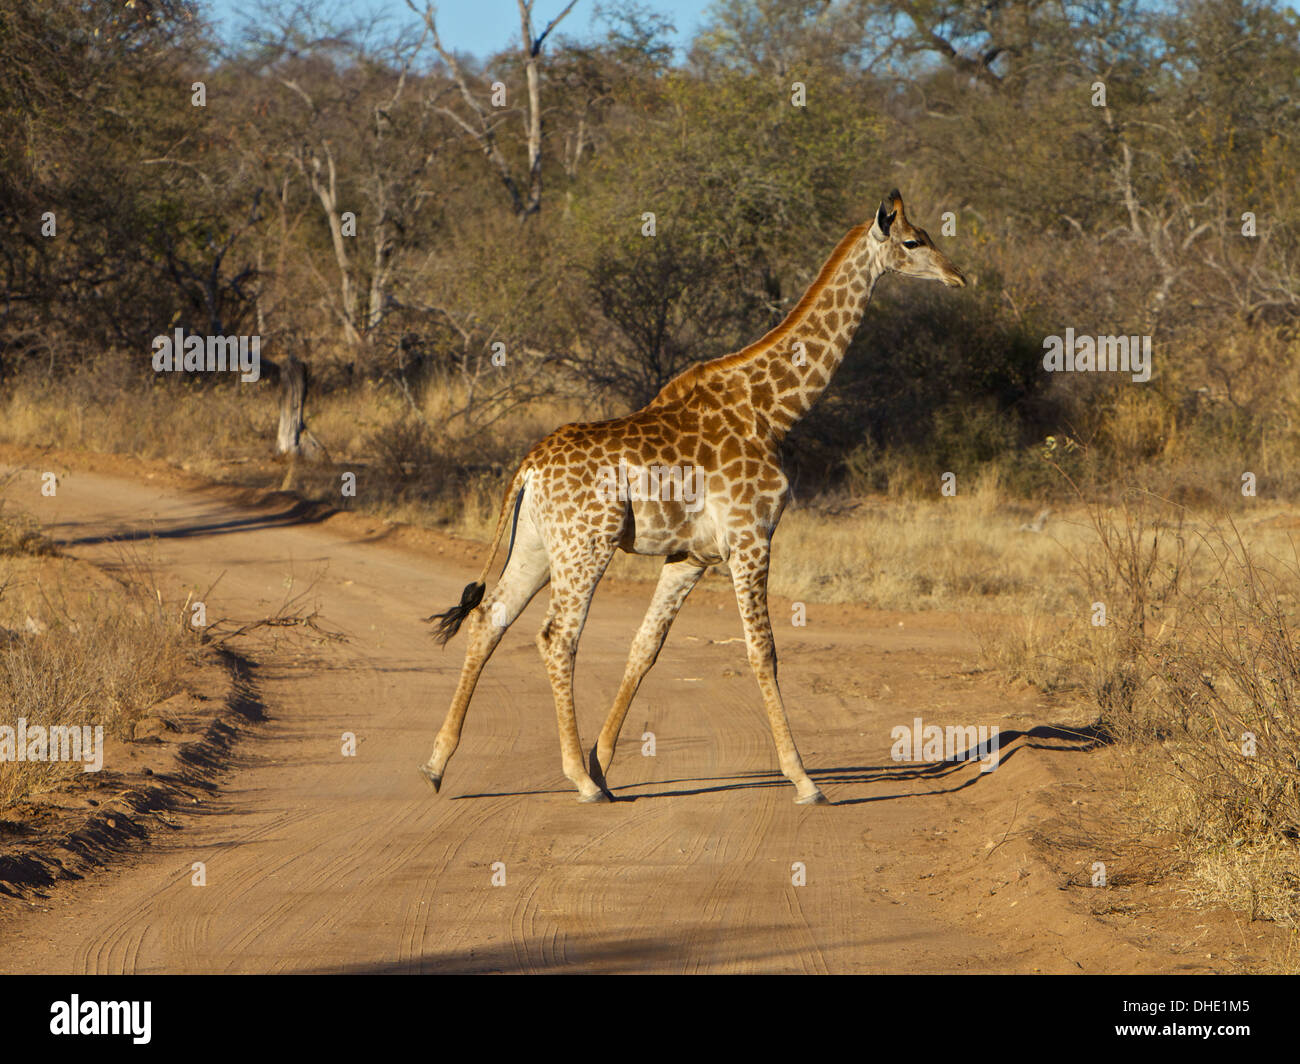 Giraffe walking in the Kruger National Park, South Africa Stock Photo